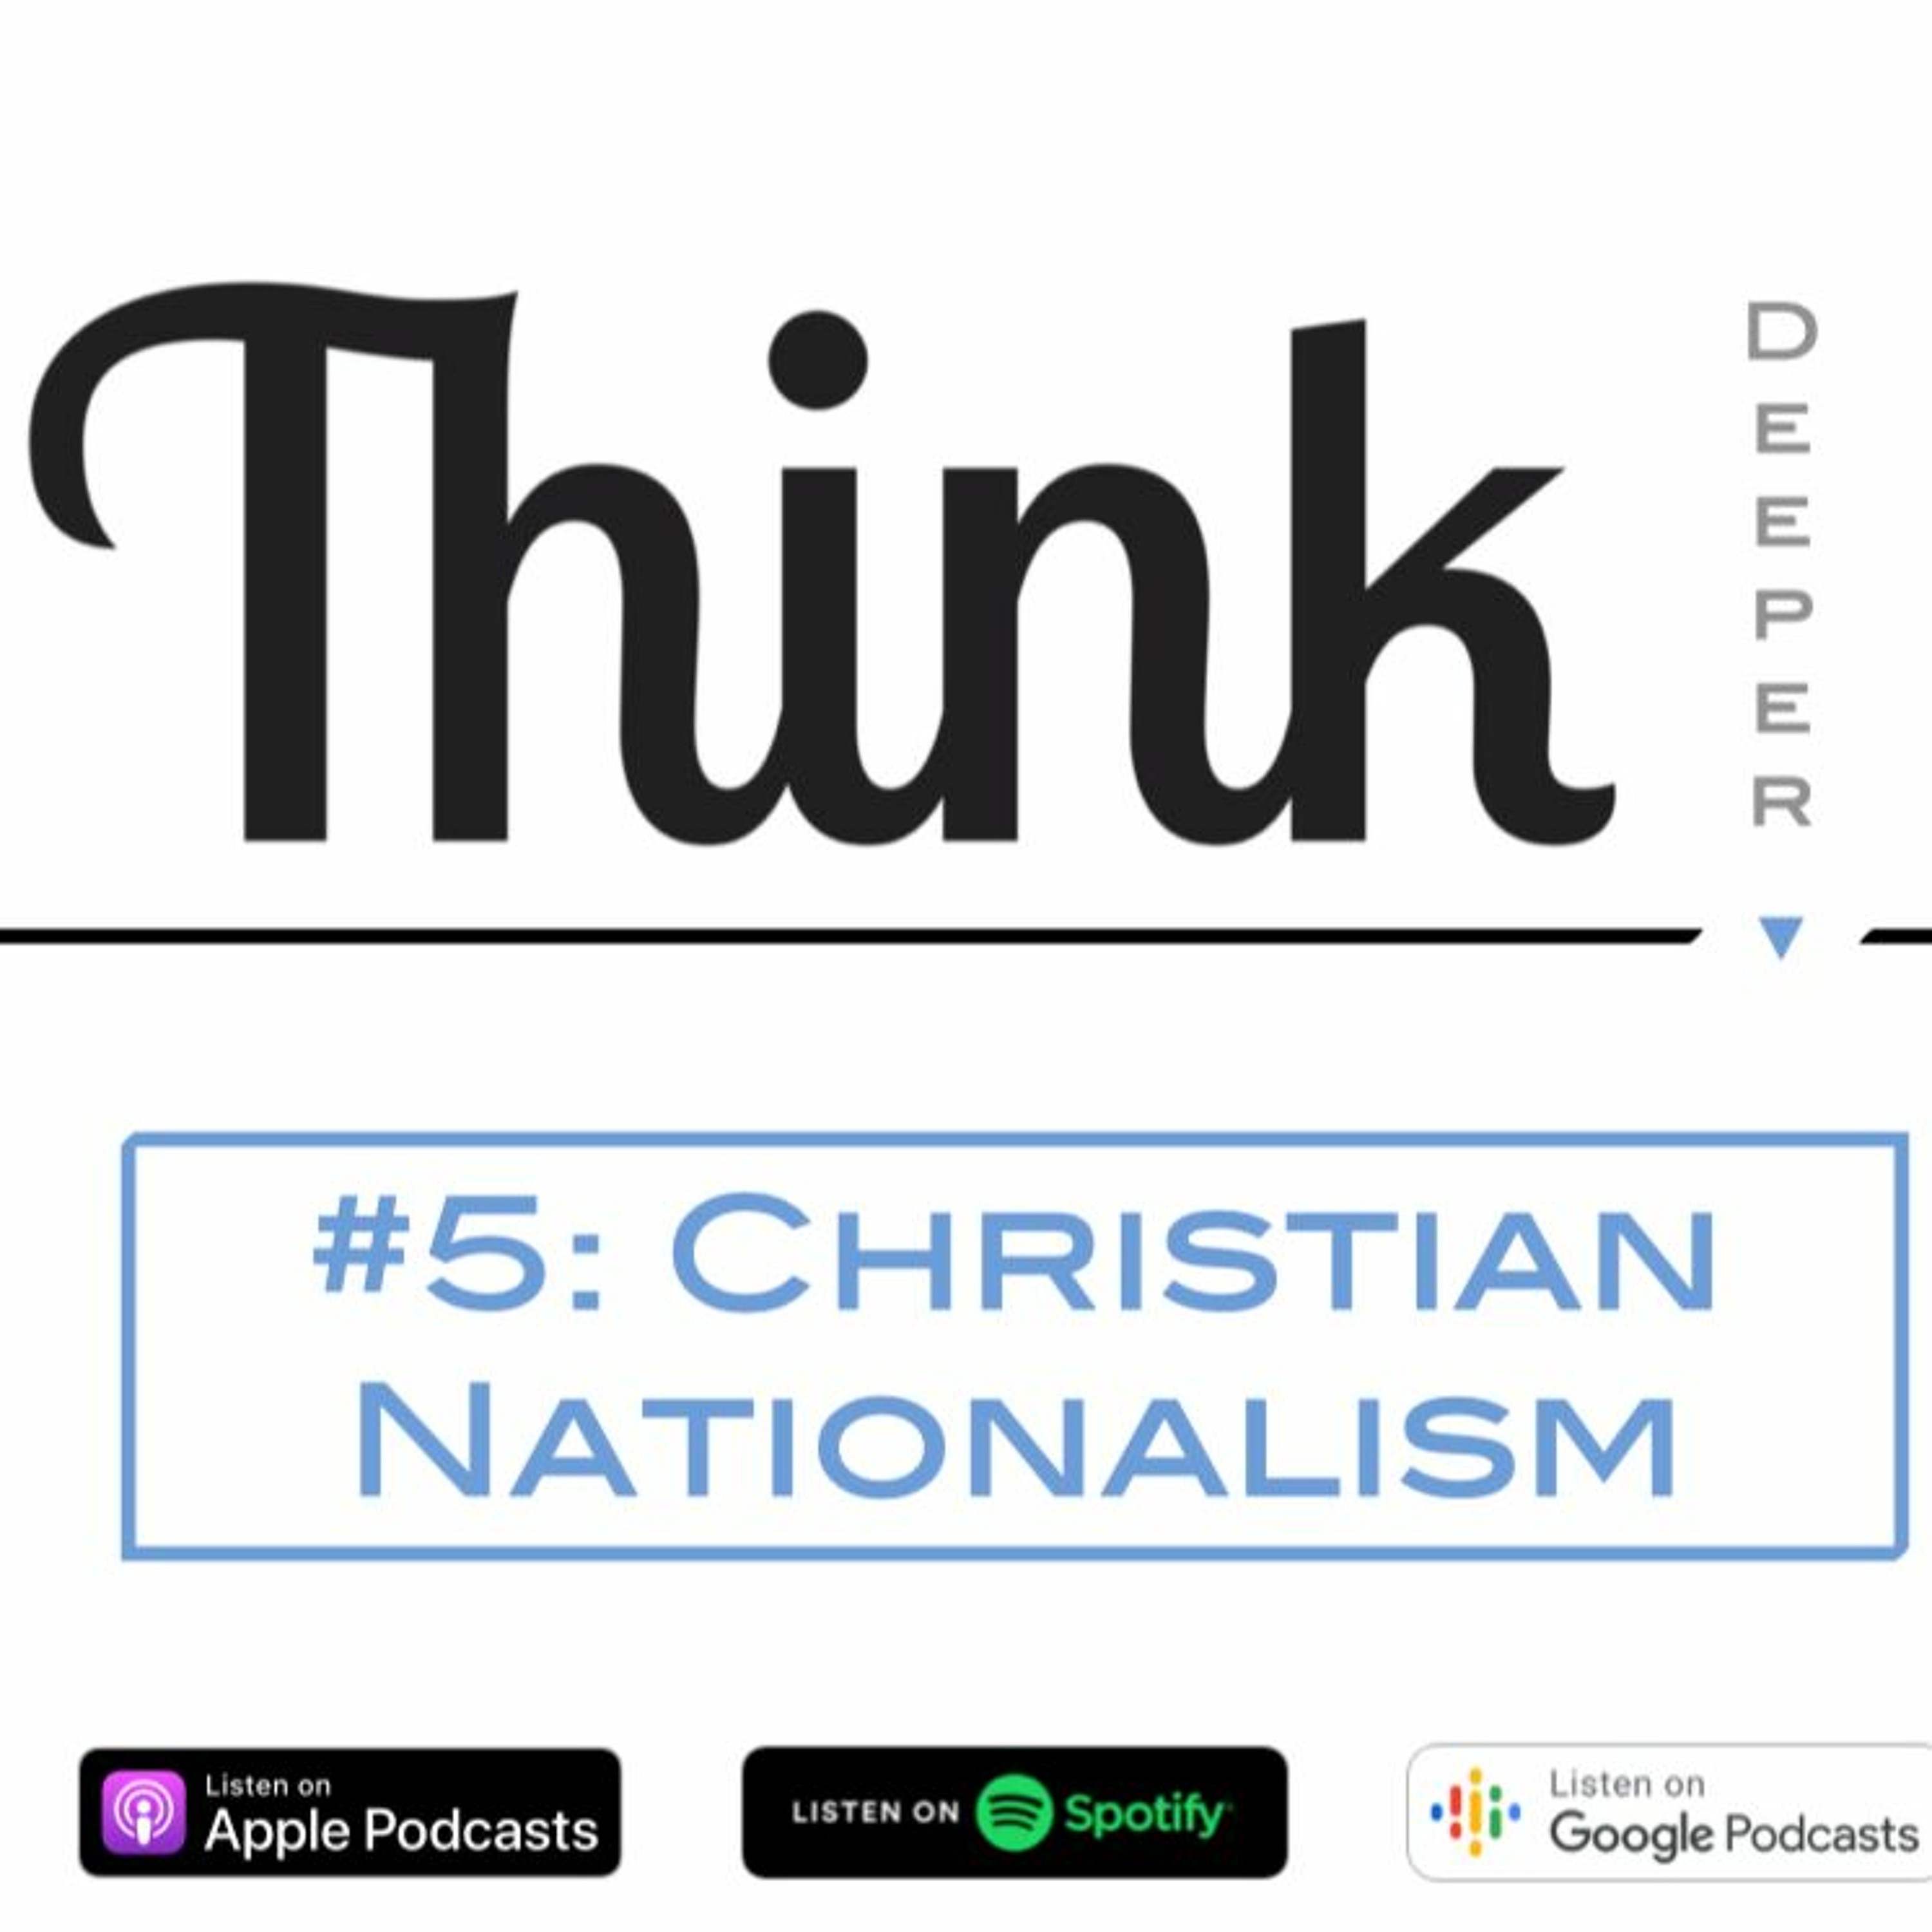 "Christian Nationalism" and how Christians view government